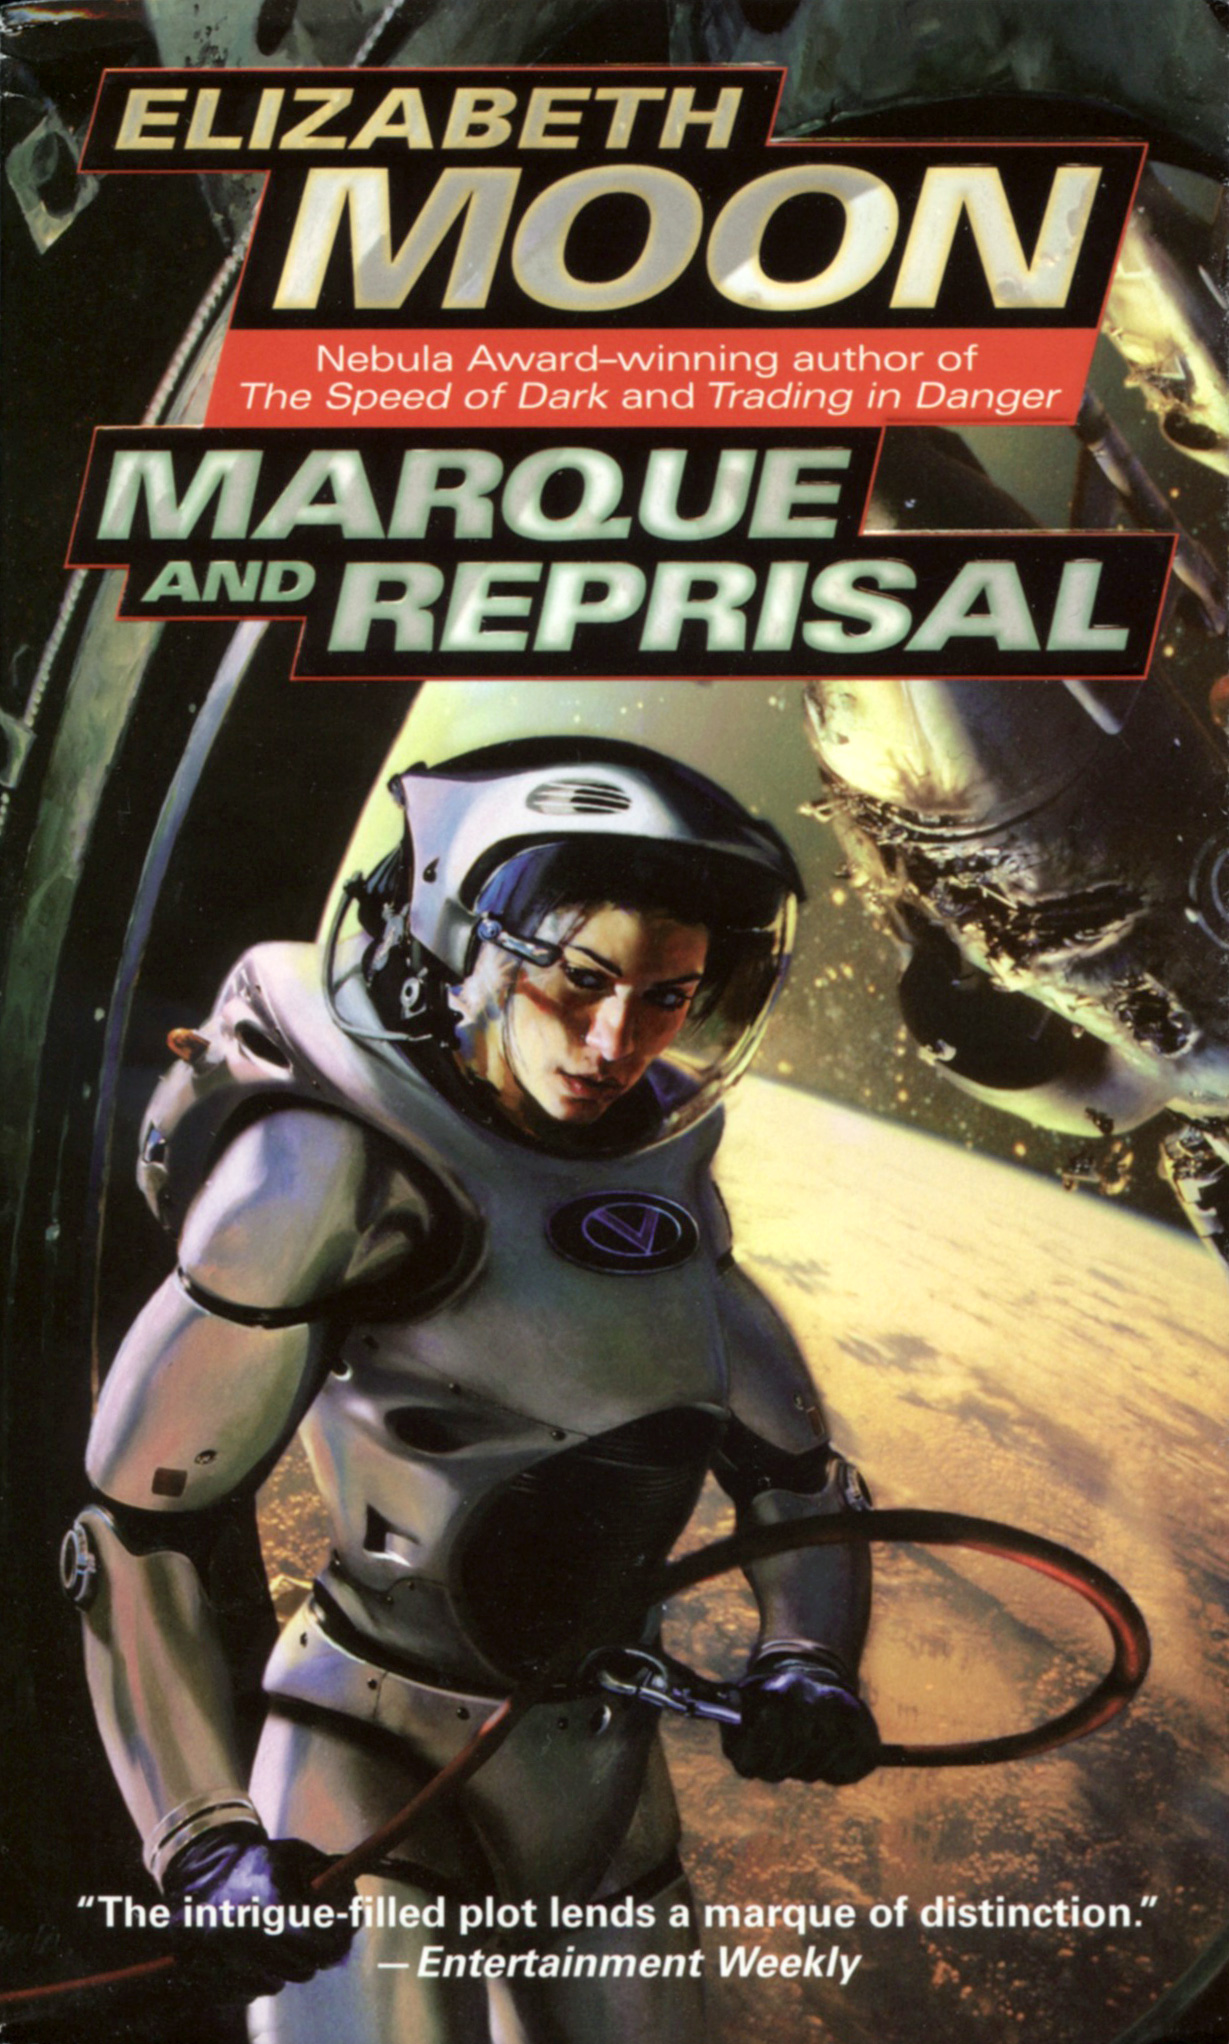 Cover art for Marque and Reprisal by Elizabeth Moon